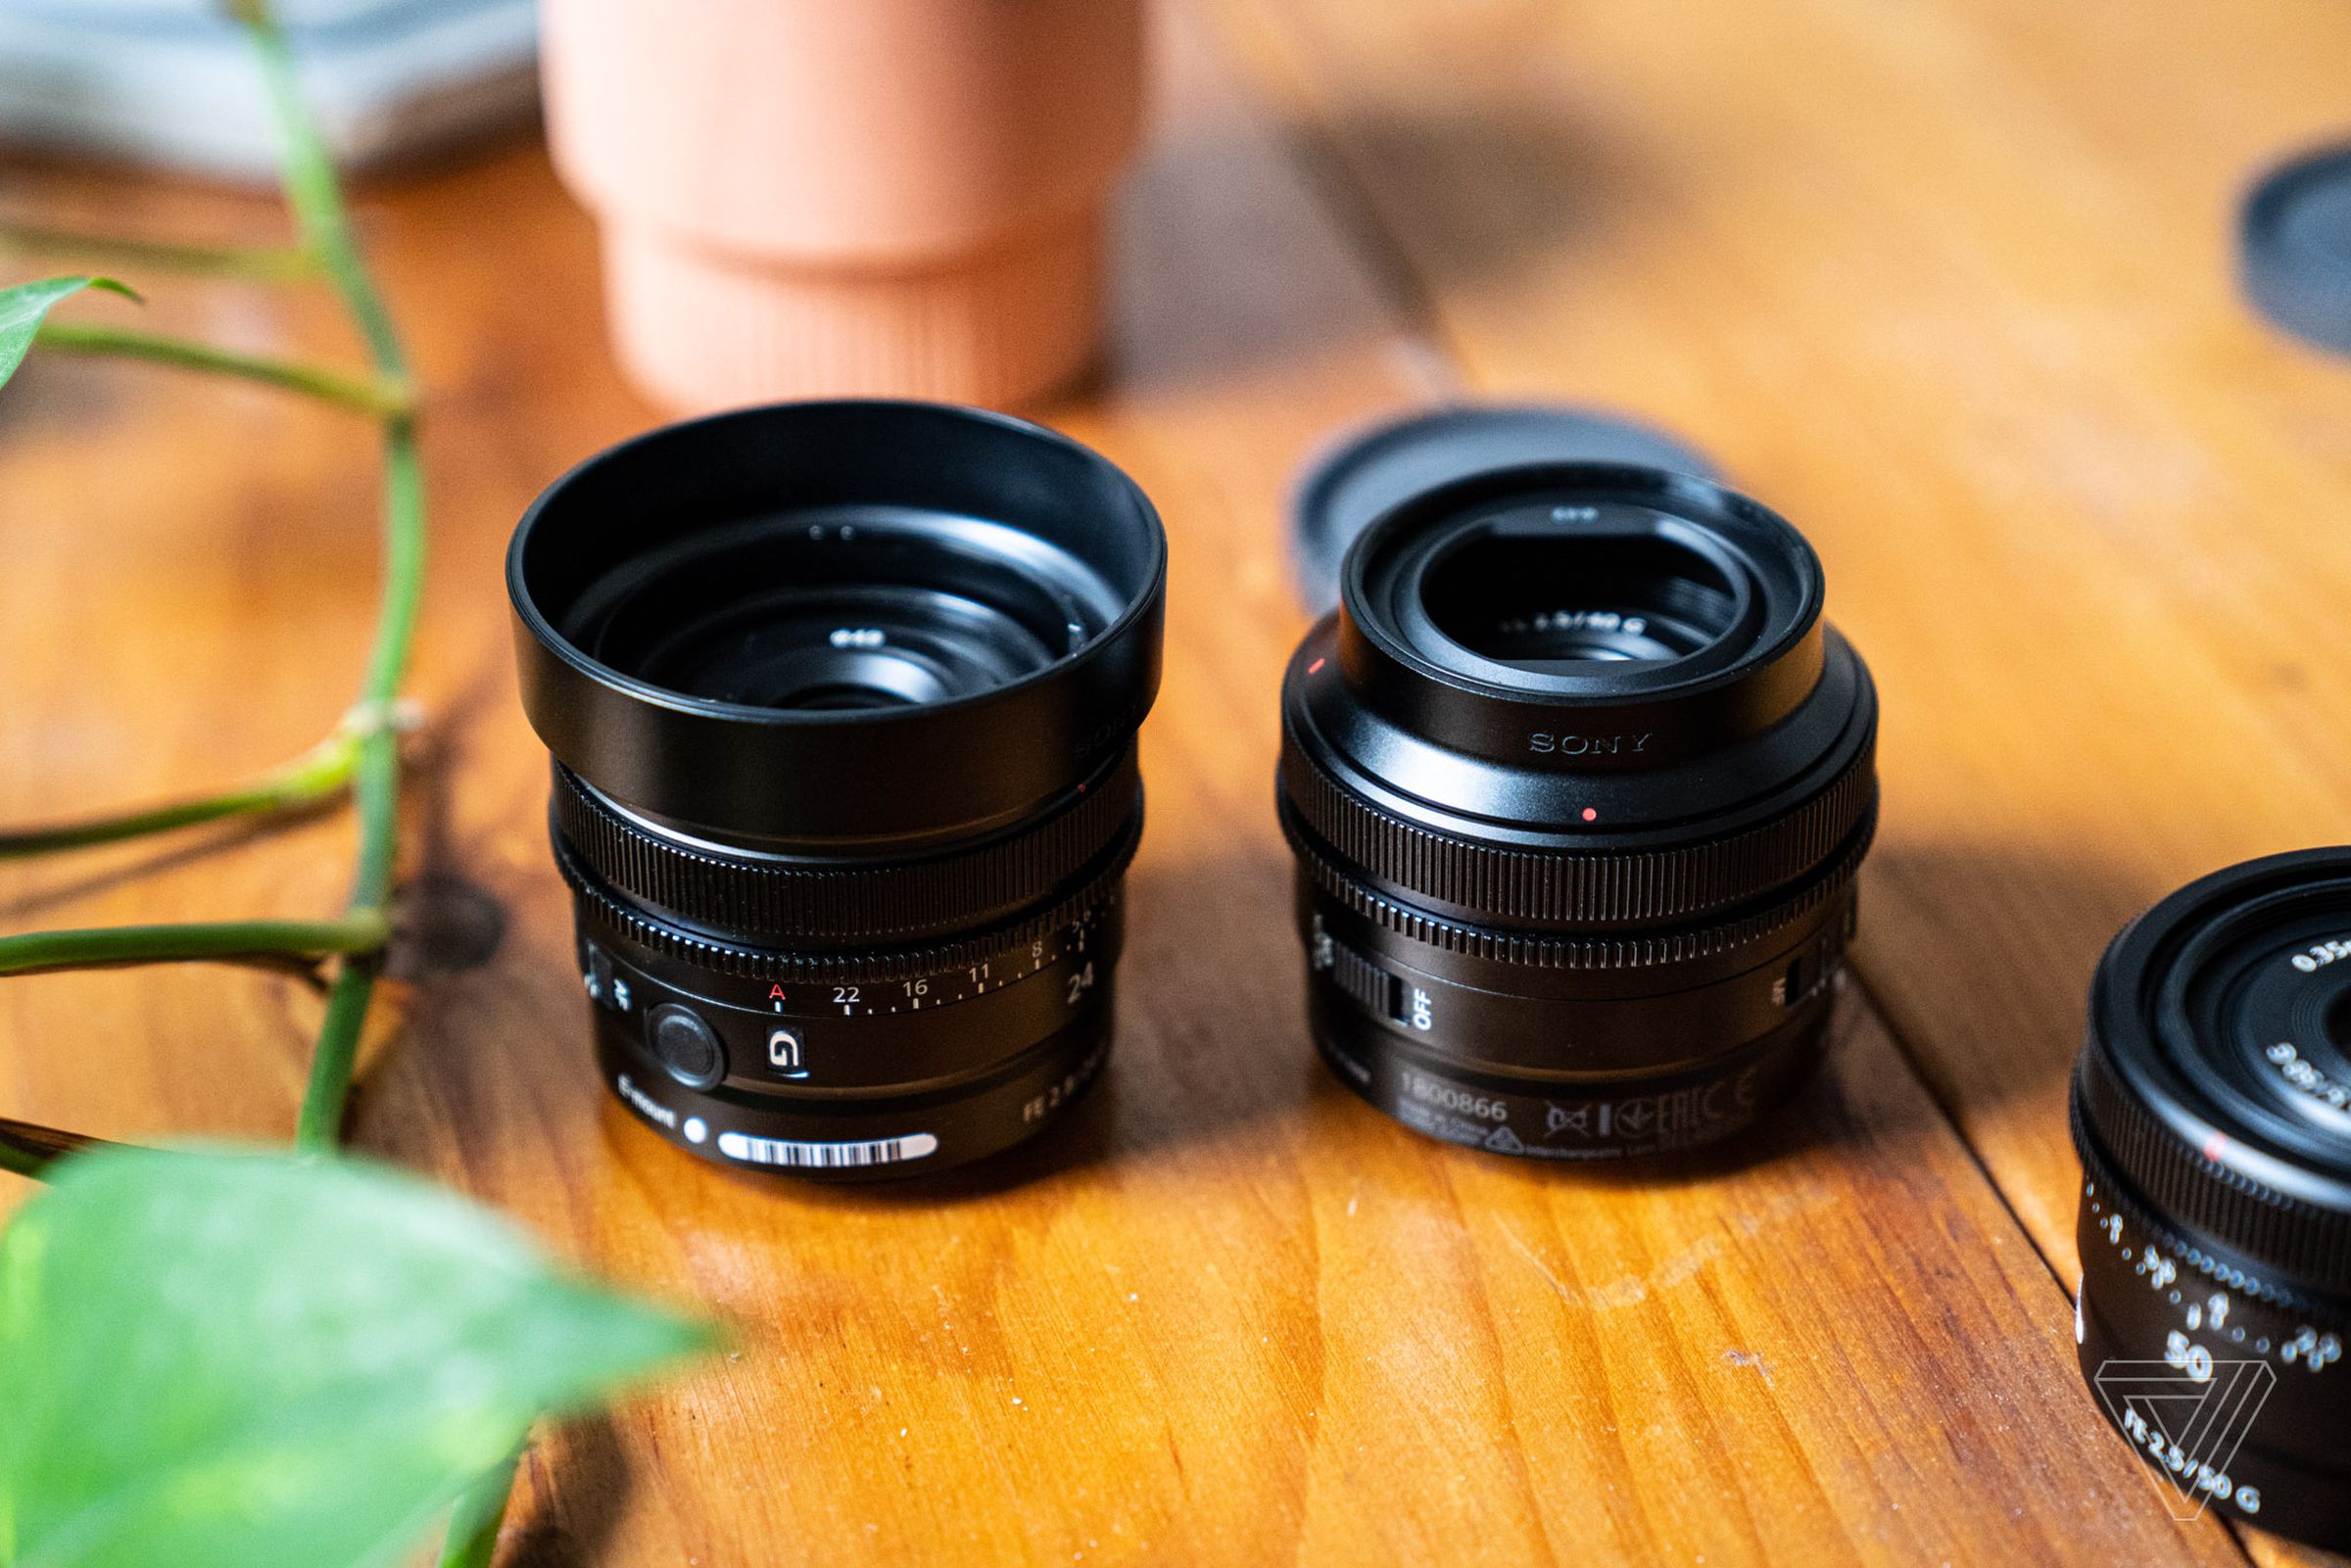 The 40mm and 50mm lens hoods have filter threads on both the lens and the lens hood for easy mounting.